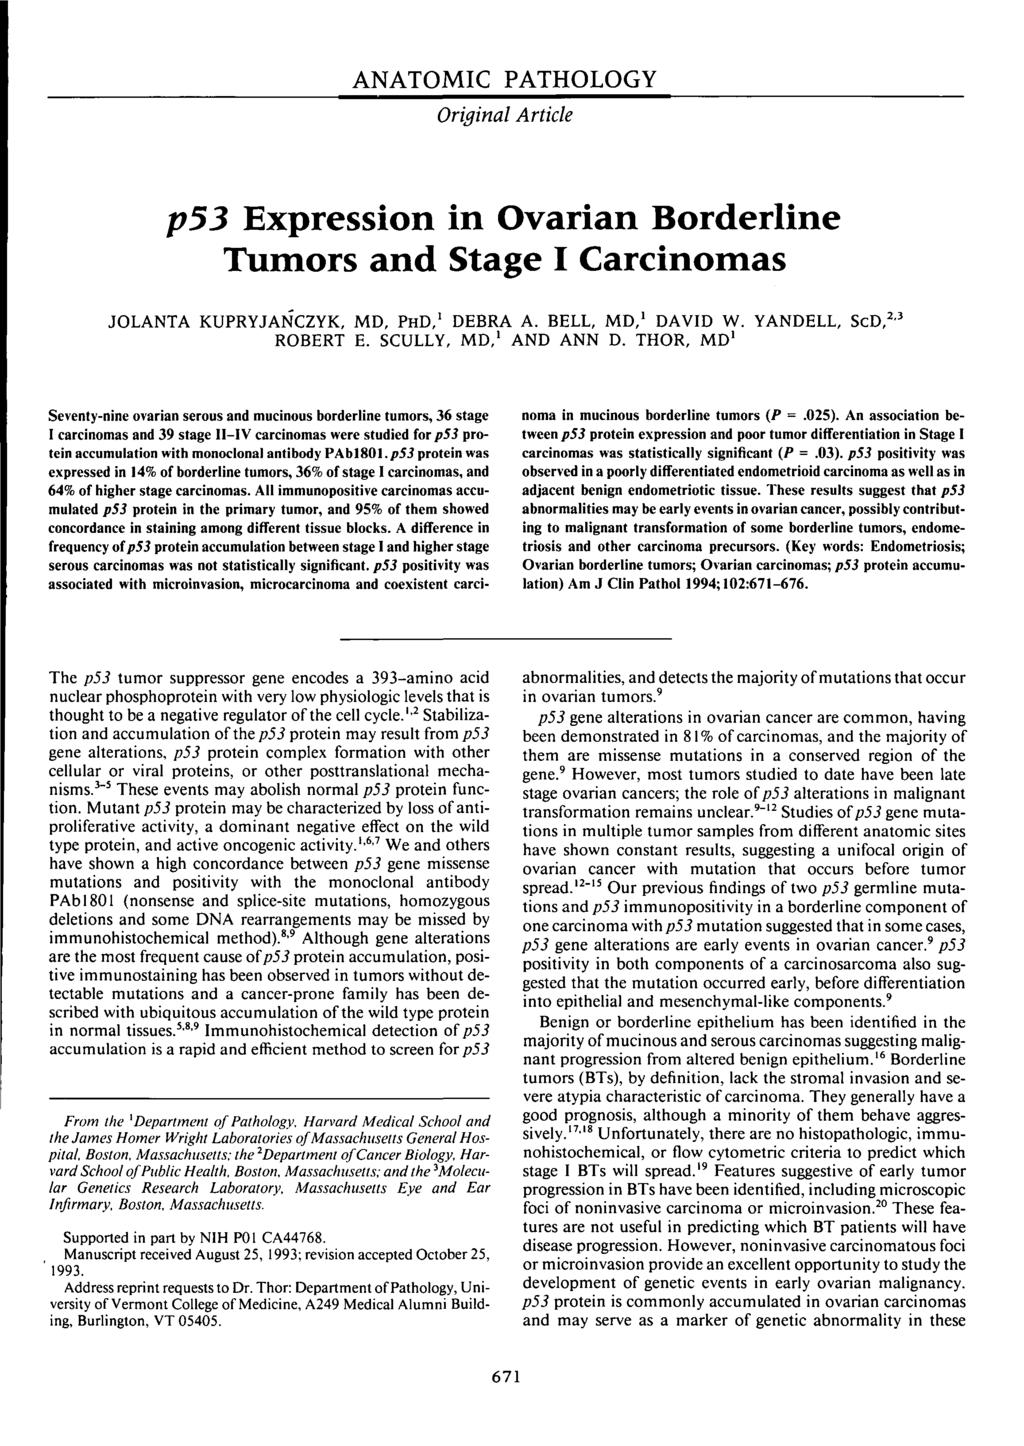 ANATOMIC PATHOLOGY p5 Expression in Ovarian Borderline Tumors and Stage I Carcinomas JOLANTA KUPRYJANCZYK, MD, PHD, DEBRA A. BELL, MD, DAVID W. YANDELL, ScD, ' ROBERT E. SCULLY, MD, AND ANN D.